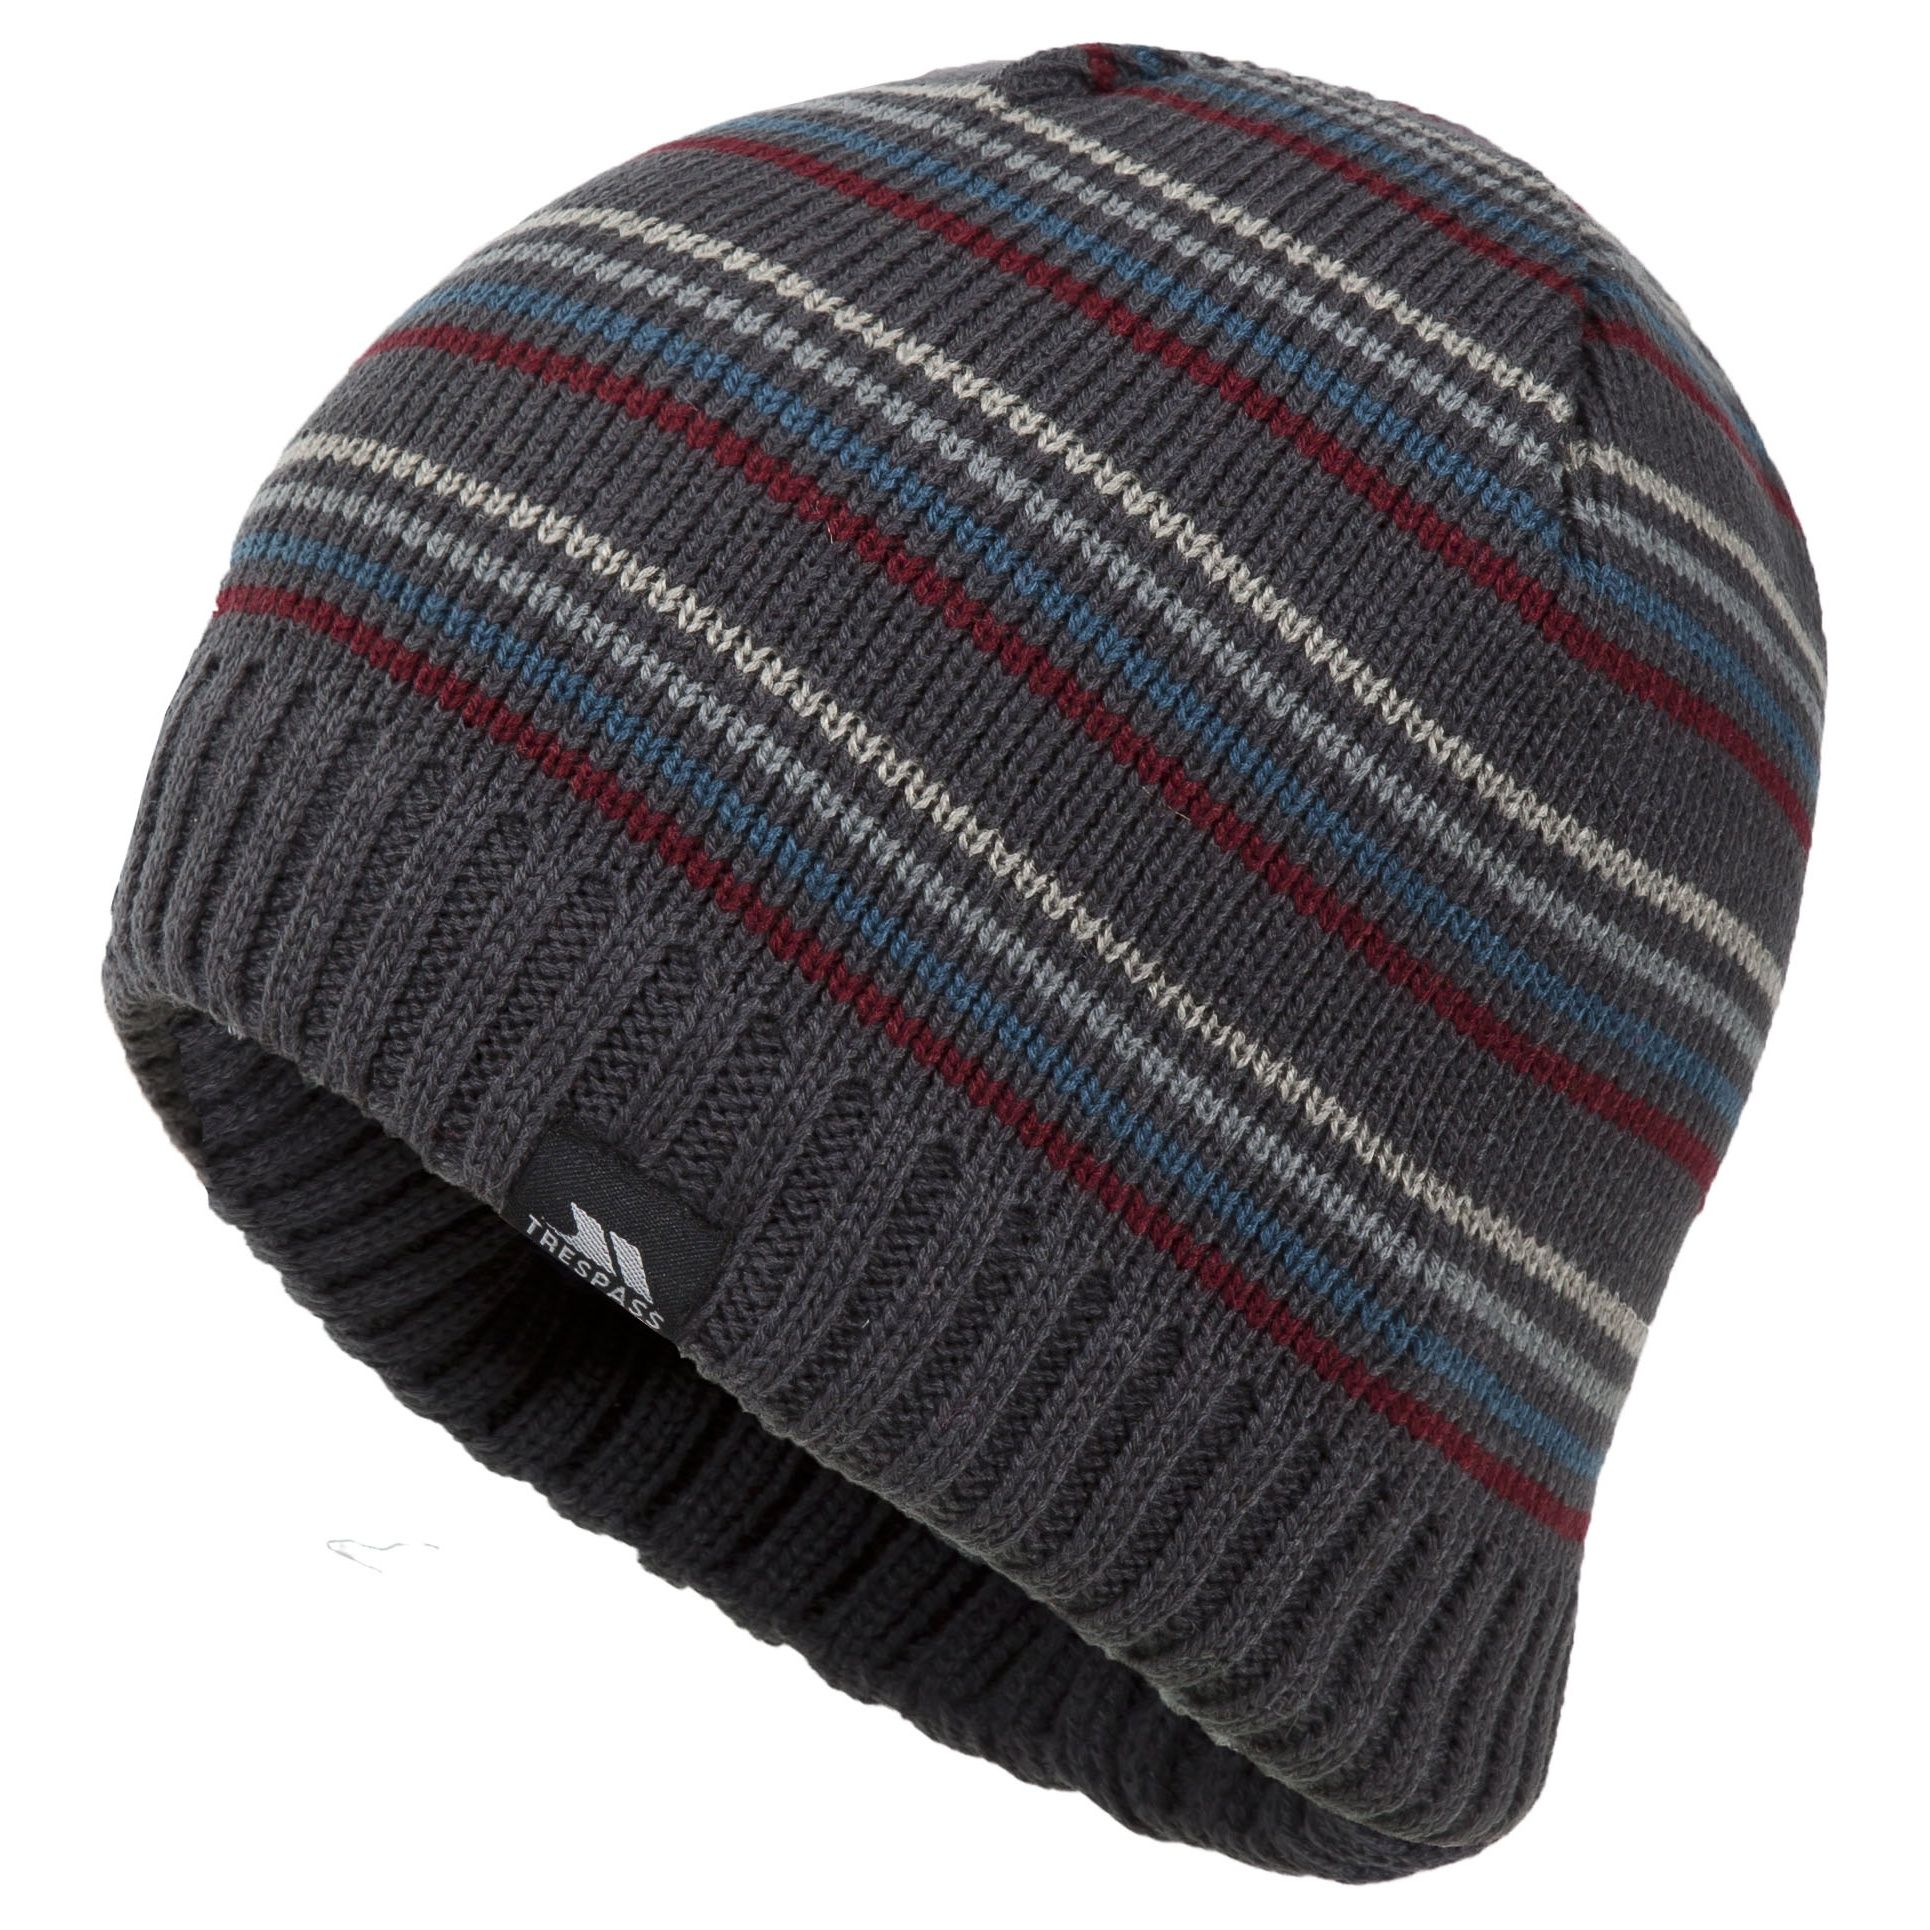 Knitted beanie. Fleece lined. Woven label. Outer: 100% Acrylic, Lining: 100% Polyester Anti Pil Fleece.